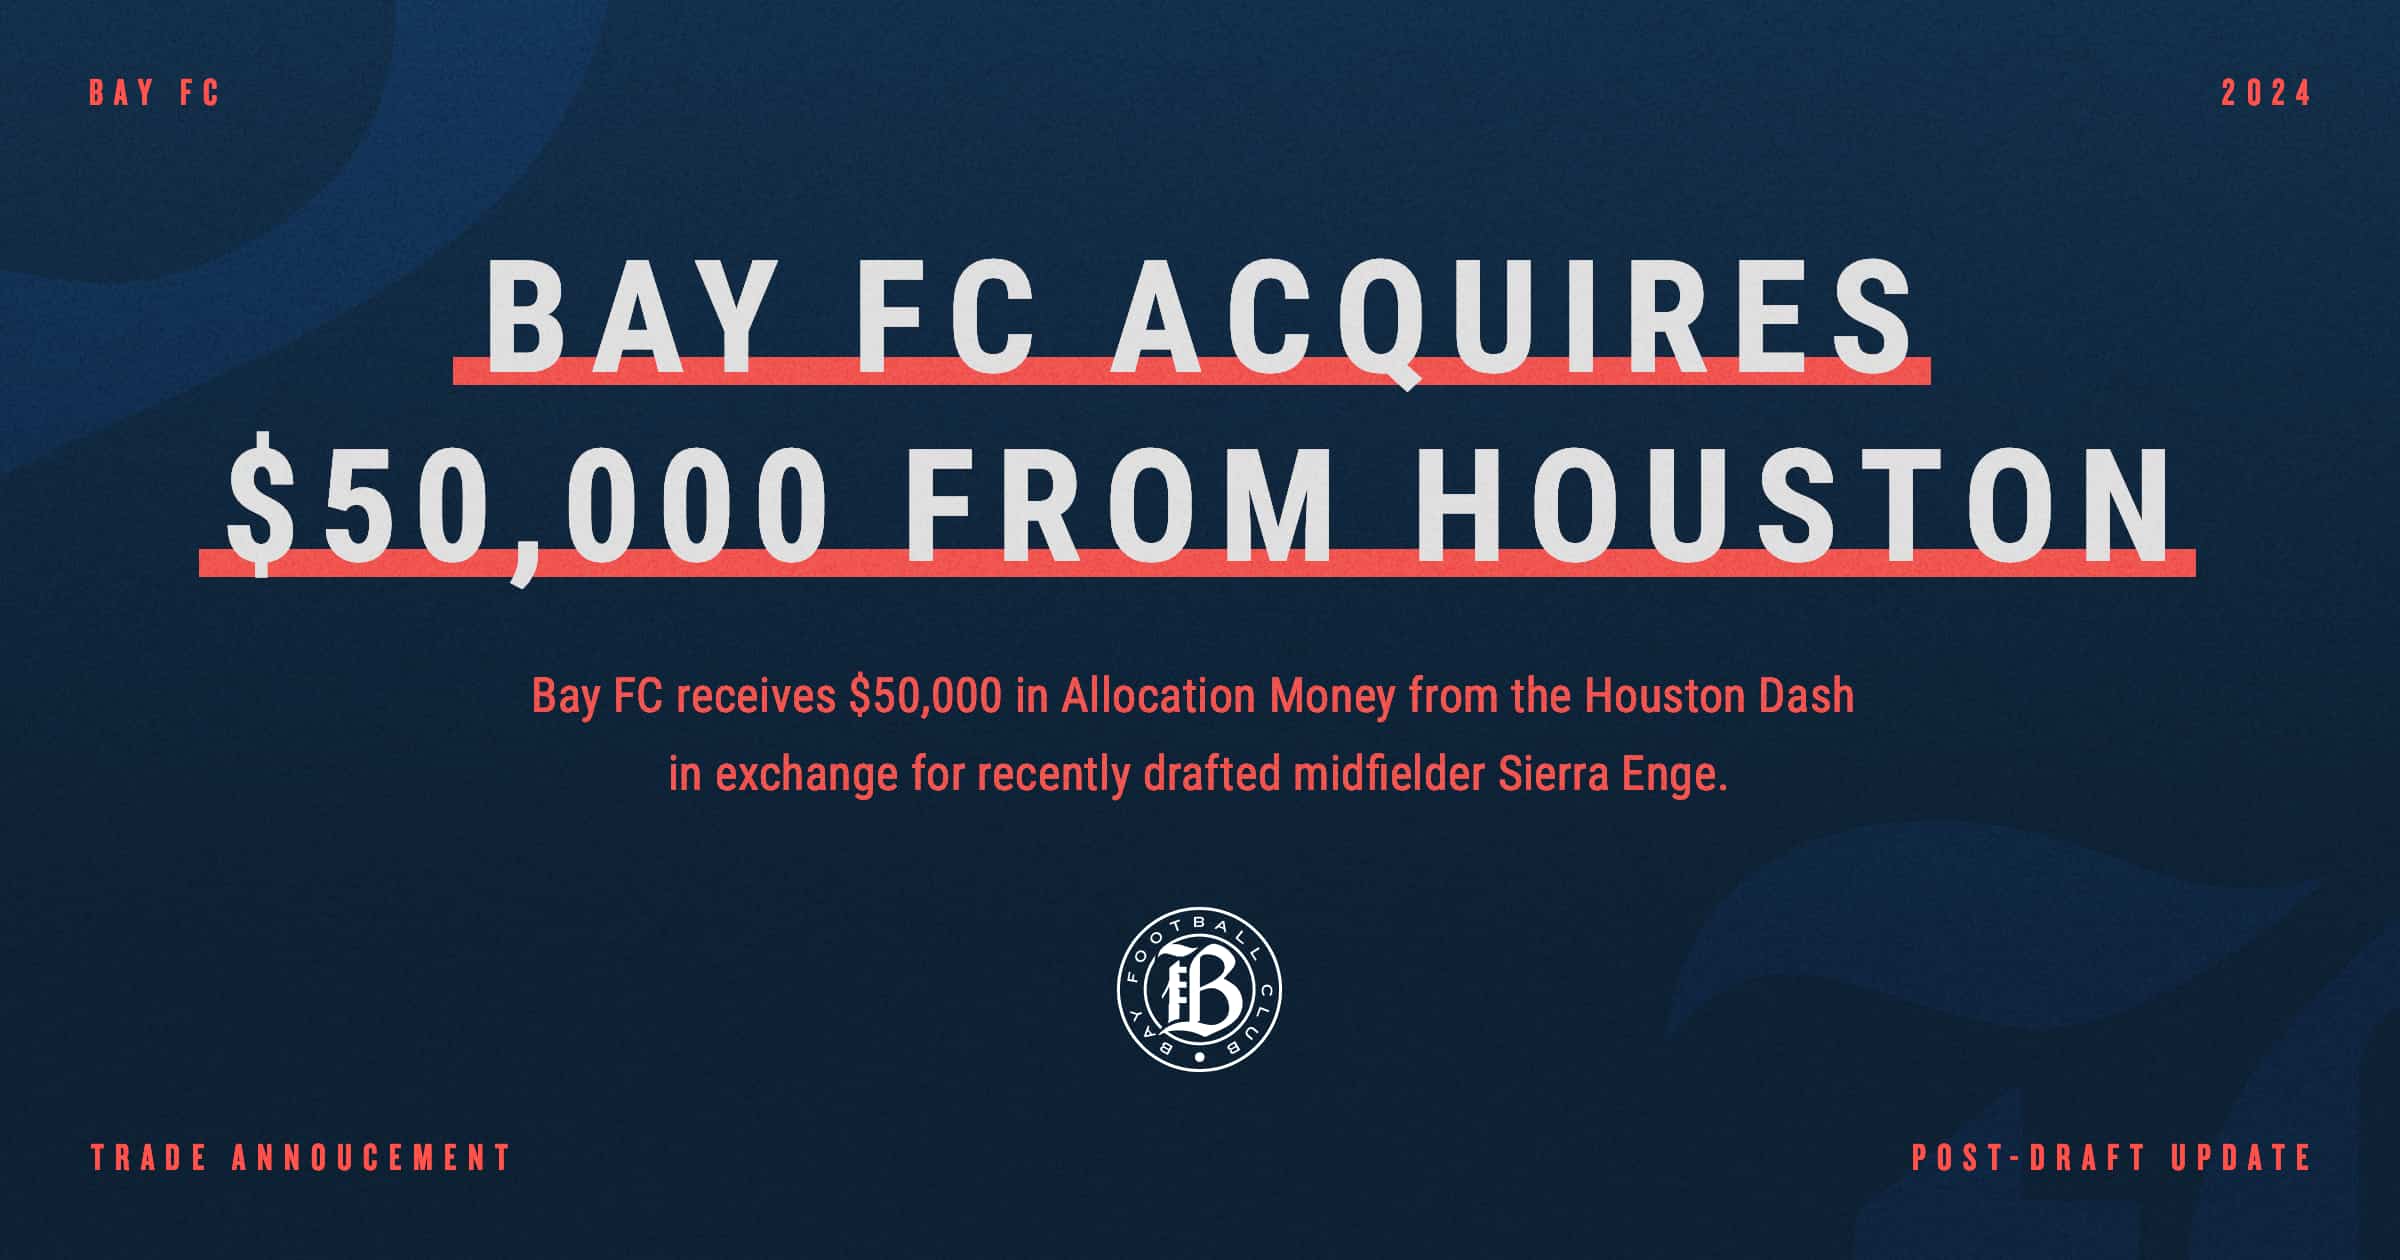 Bay FC Acquires $50,000 from Houston